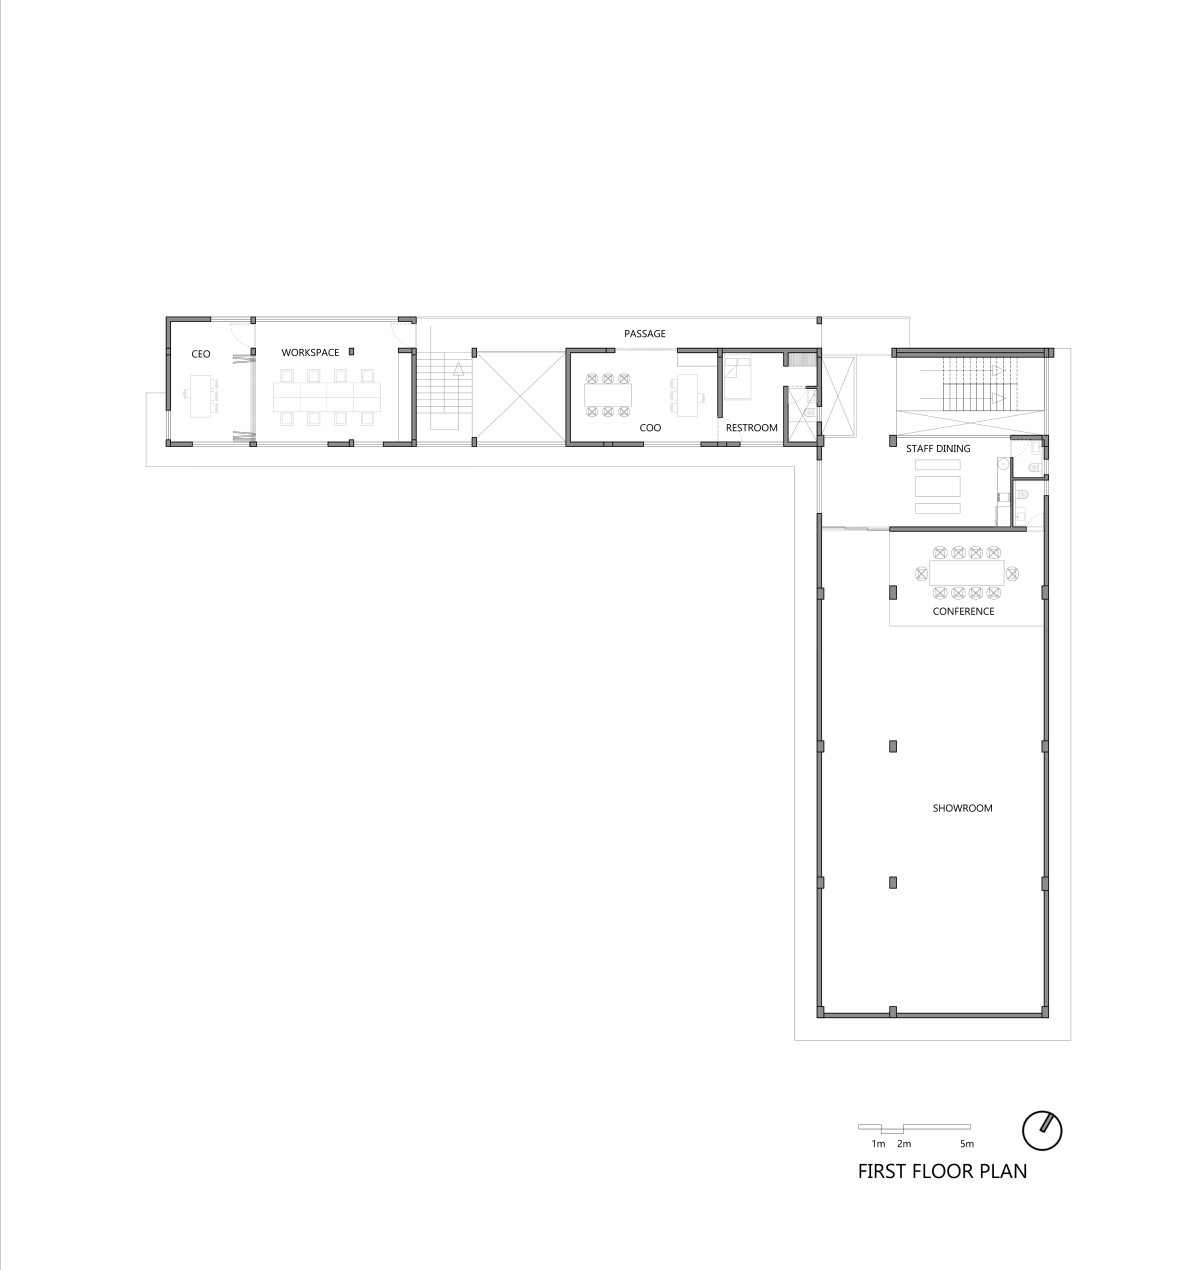 First floor plan of The Natural Floors by Barefoot Architects